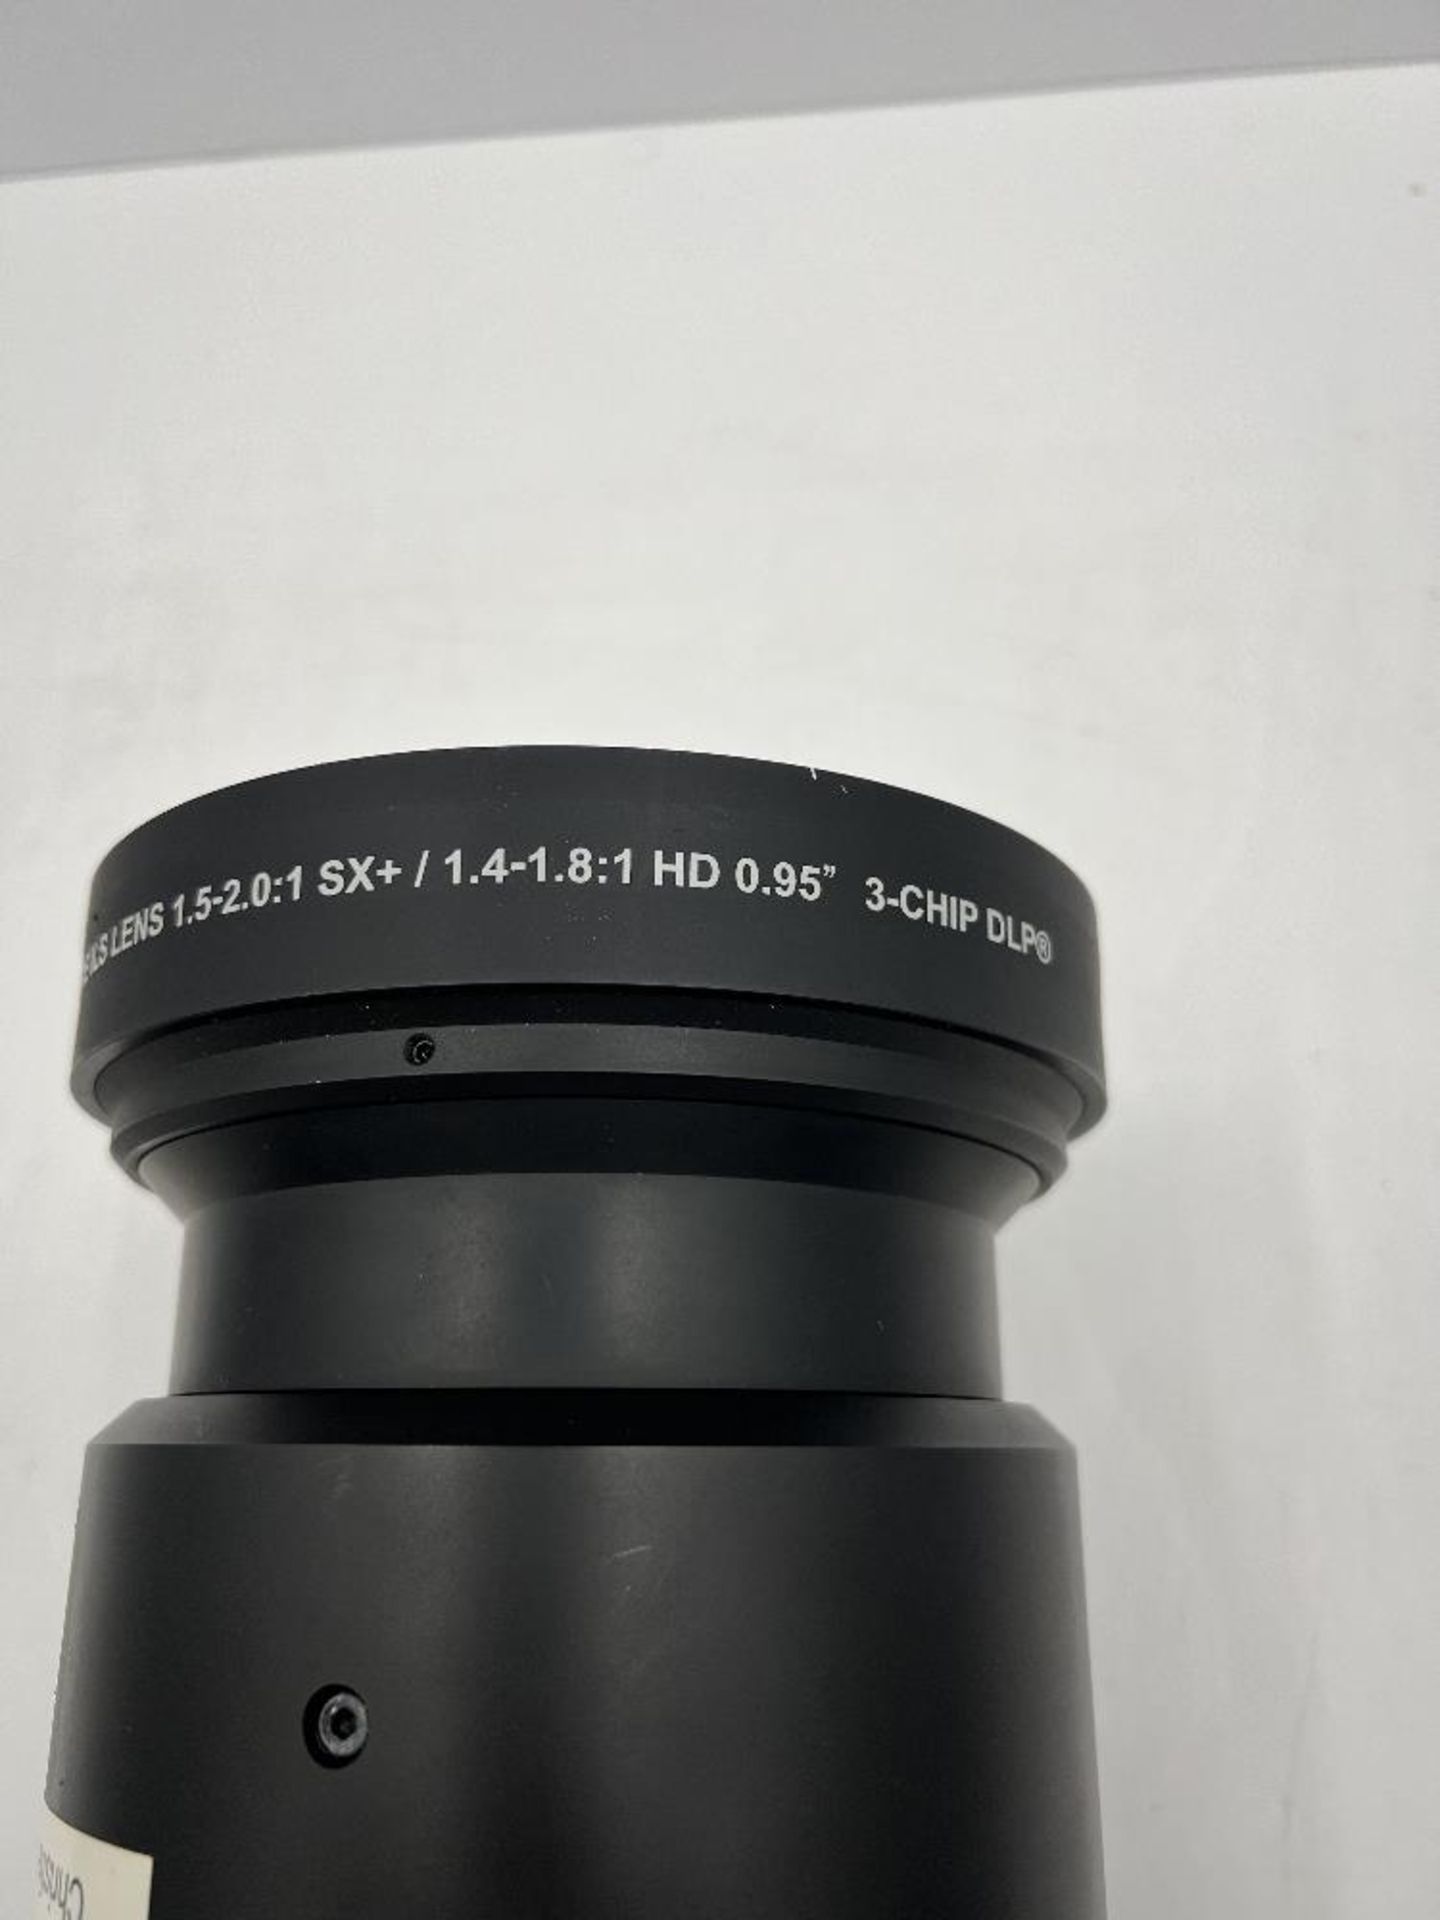 Christie M-Series HD Lens 1.4-1.8 With Heavy Duty Peli Case - Image 6 of 9